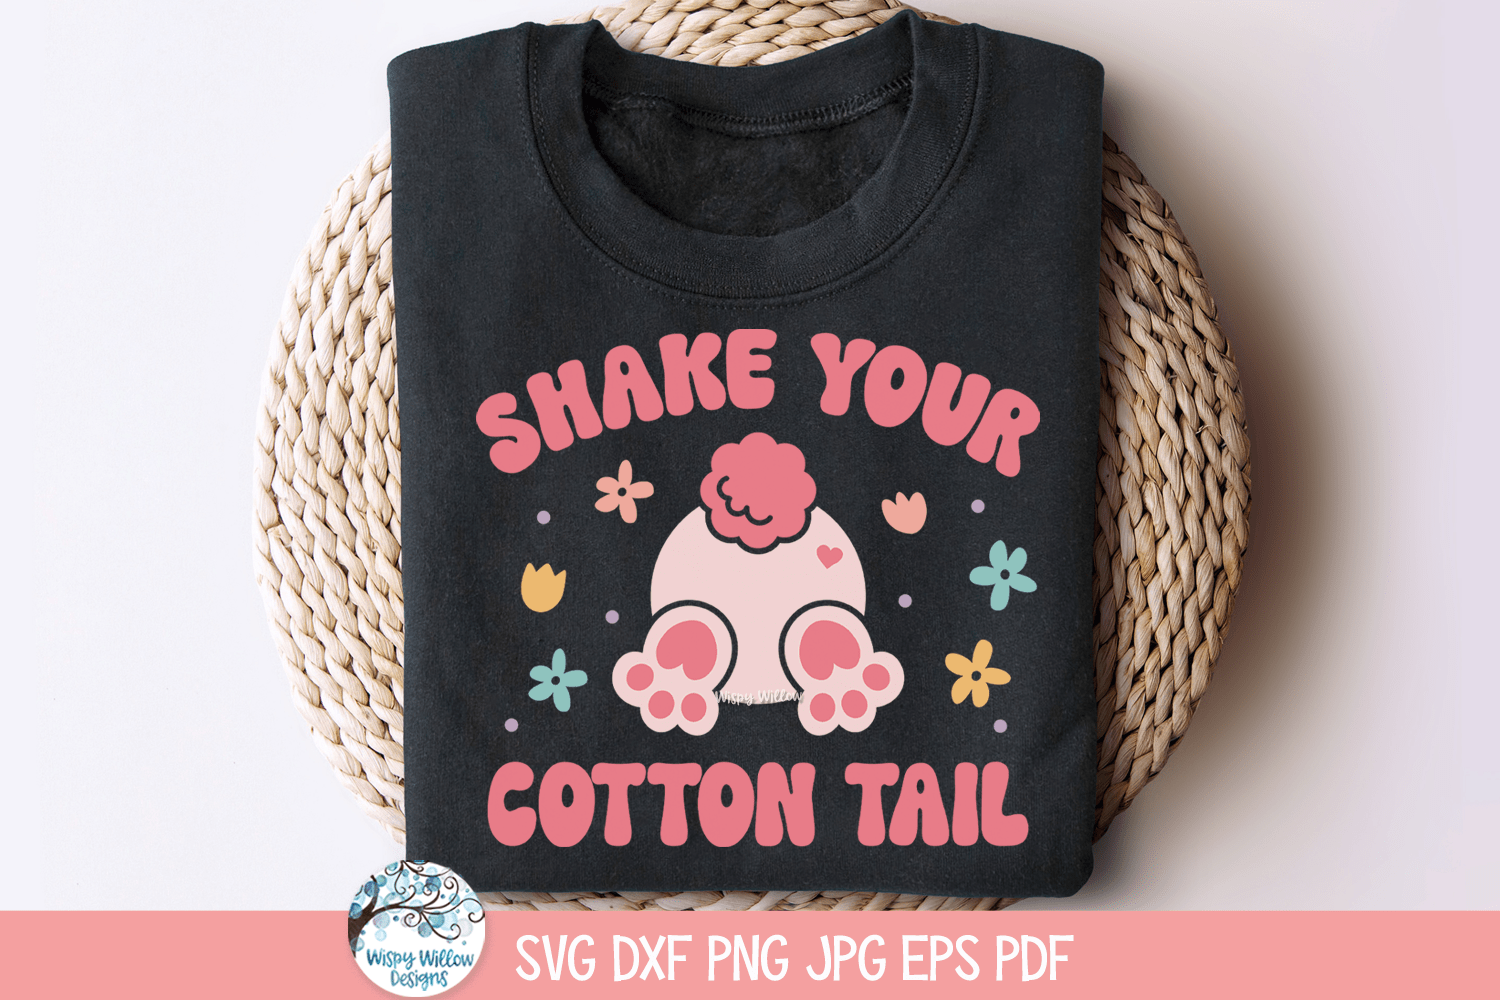 Shake Your Cotton Tail SVG | Colorful Spring Tee Wispy Willow Designs Company